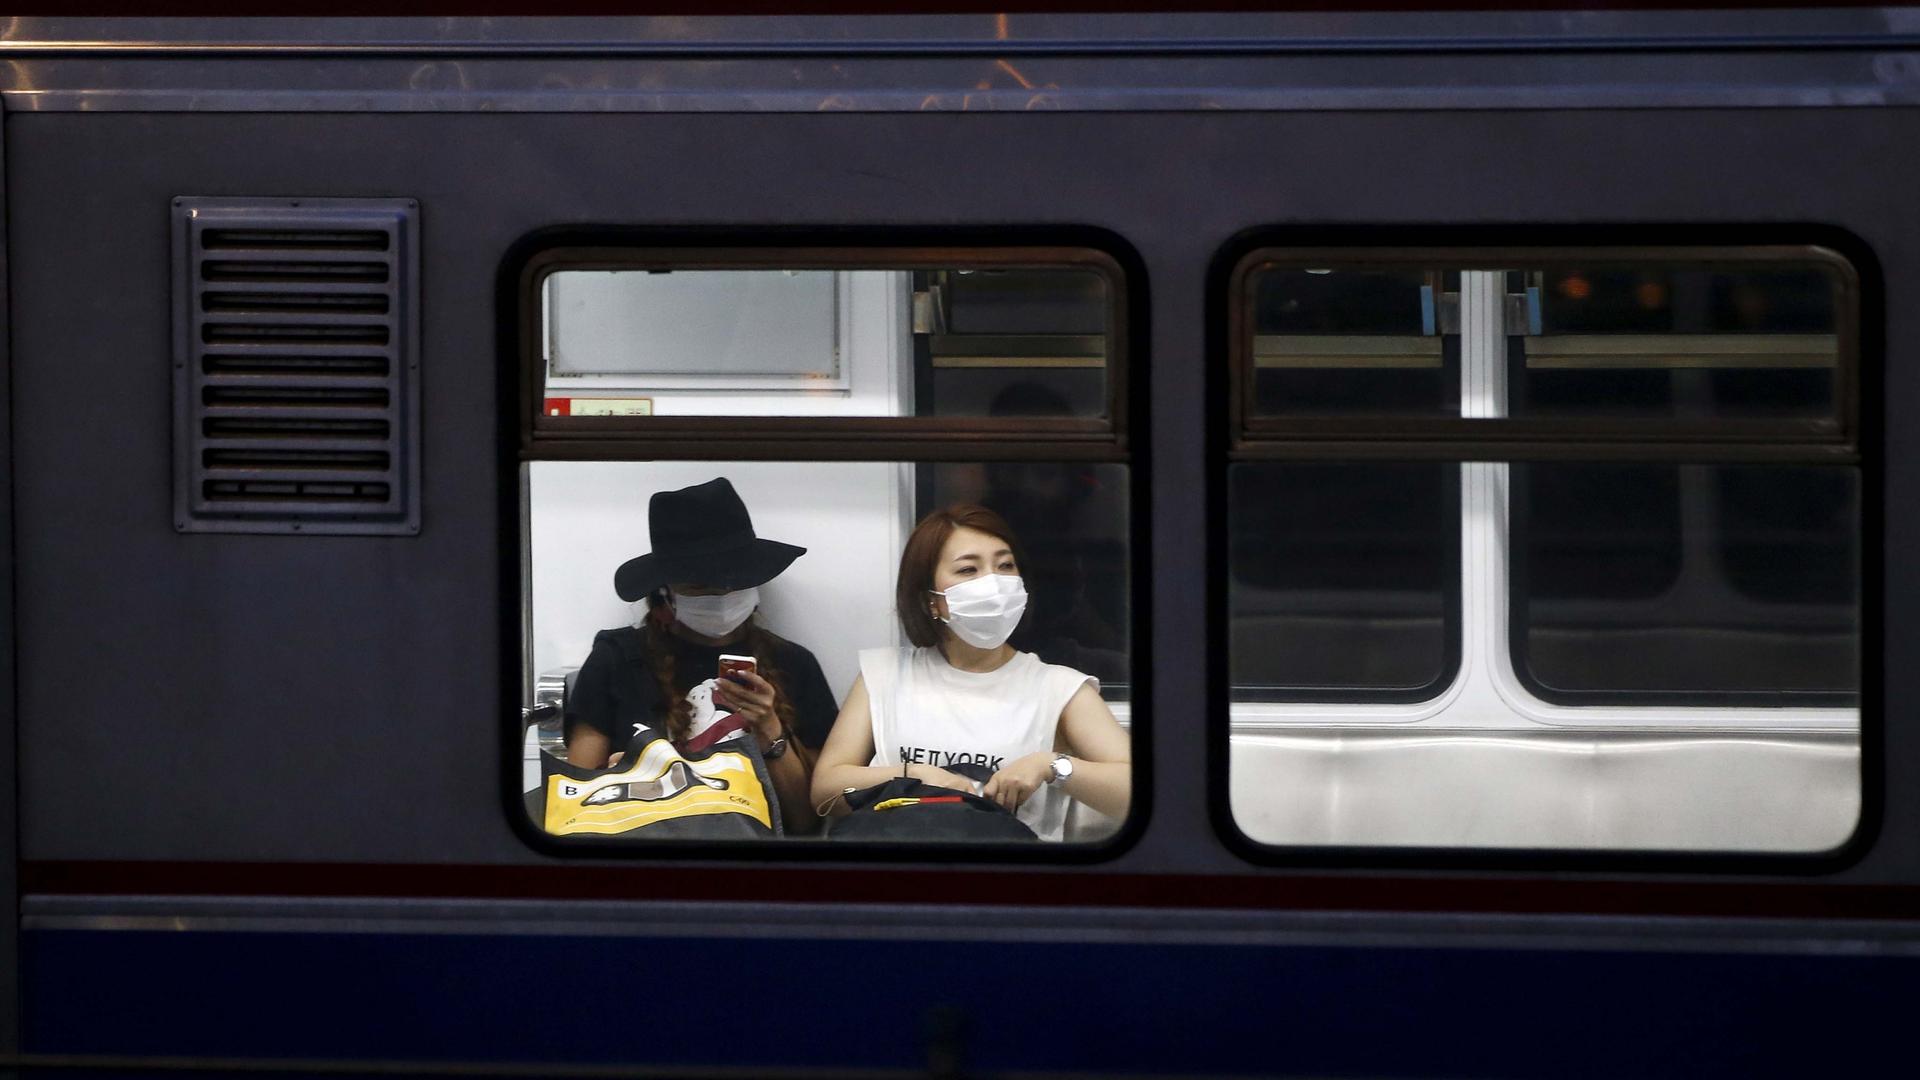 Women wearing masks to prevent contracting Middle East Respiratory Syndrome (MERS) ride a subway train in Seoul, South Korea, on June 12, 2015.